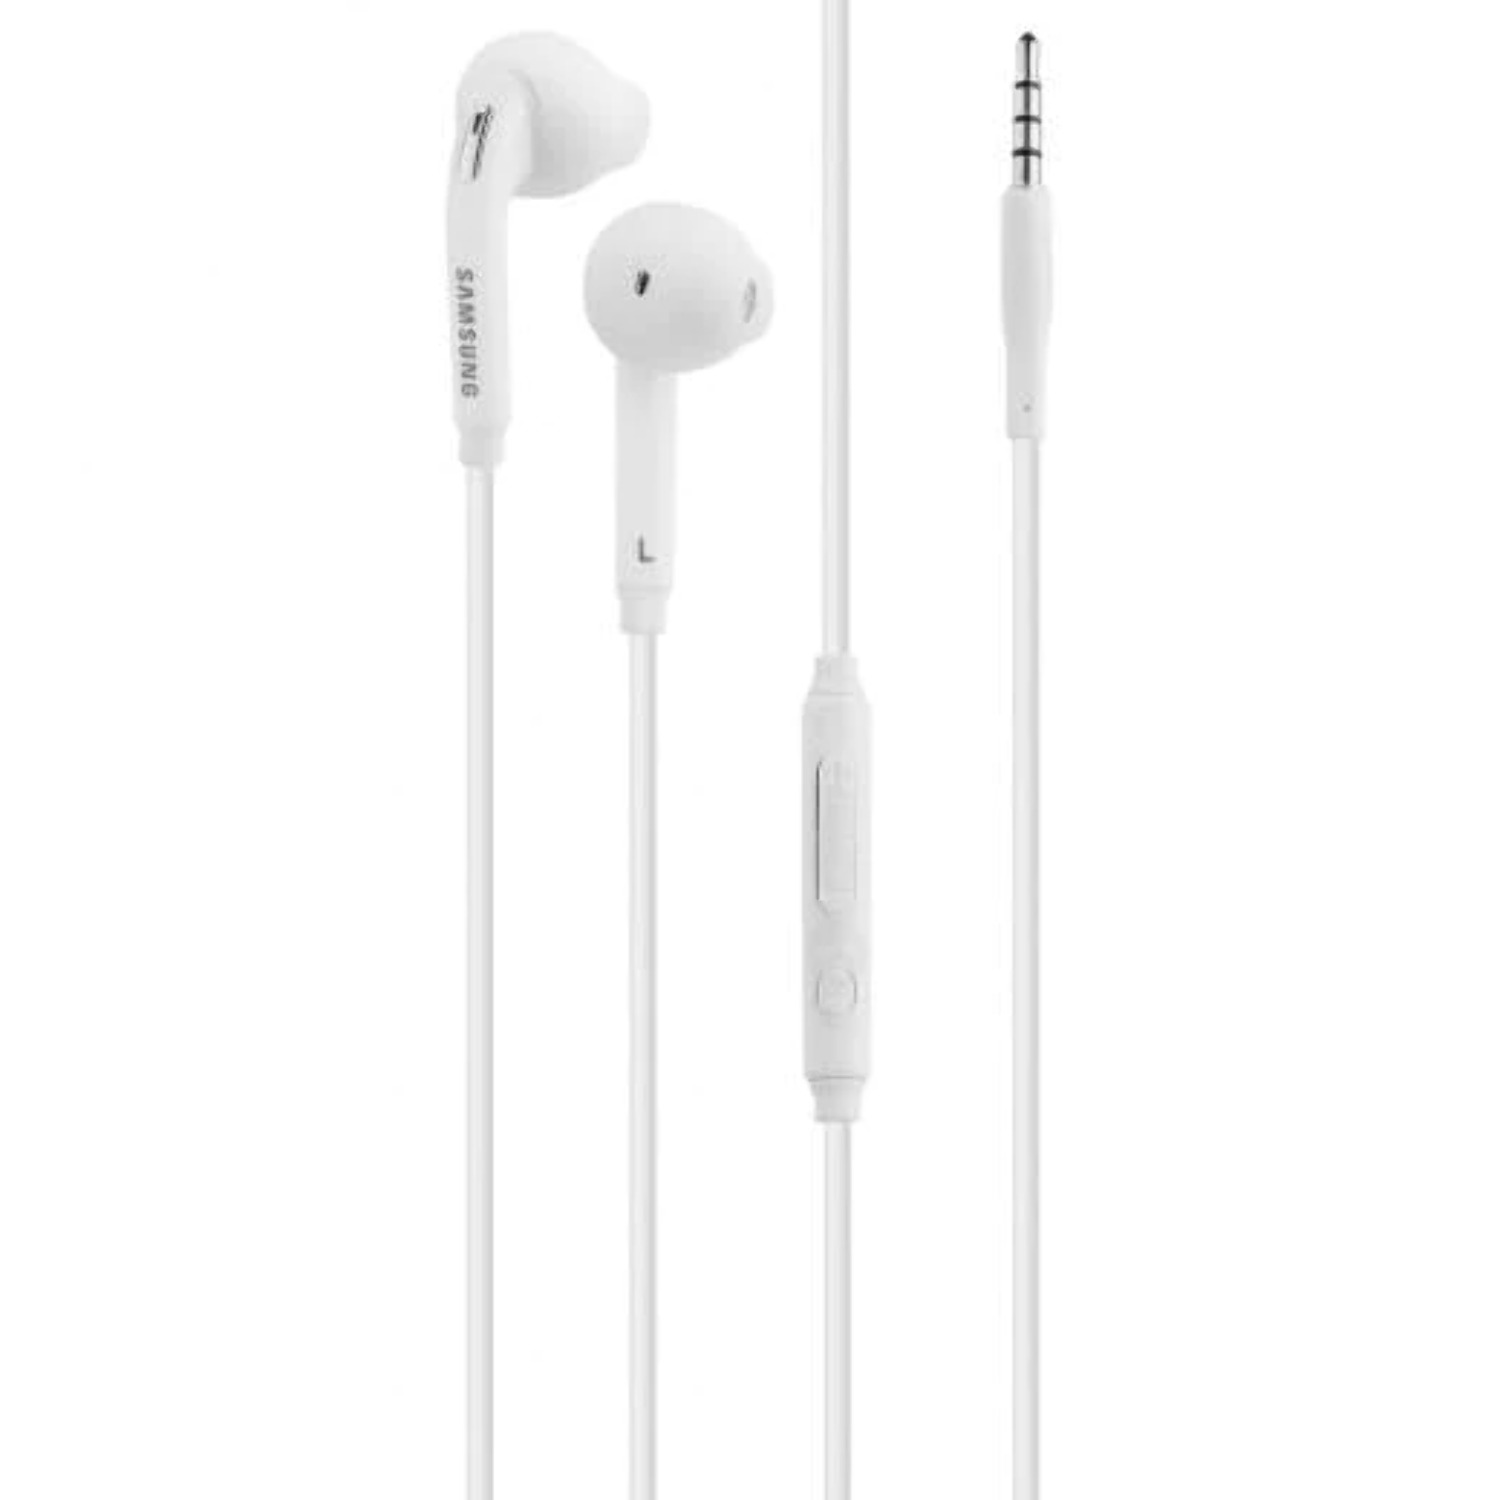 Premium Wired Headset 3.5mm Earbud Stereo In-Ear Headphones with in-line Remote & Microphone Compatible with BlackBerry Curve 9315 / 9320 - image 1 of 1